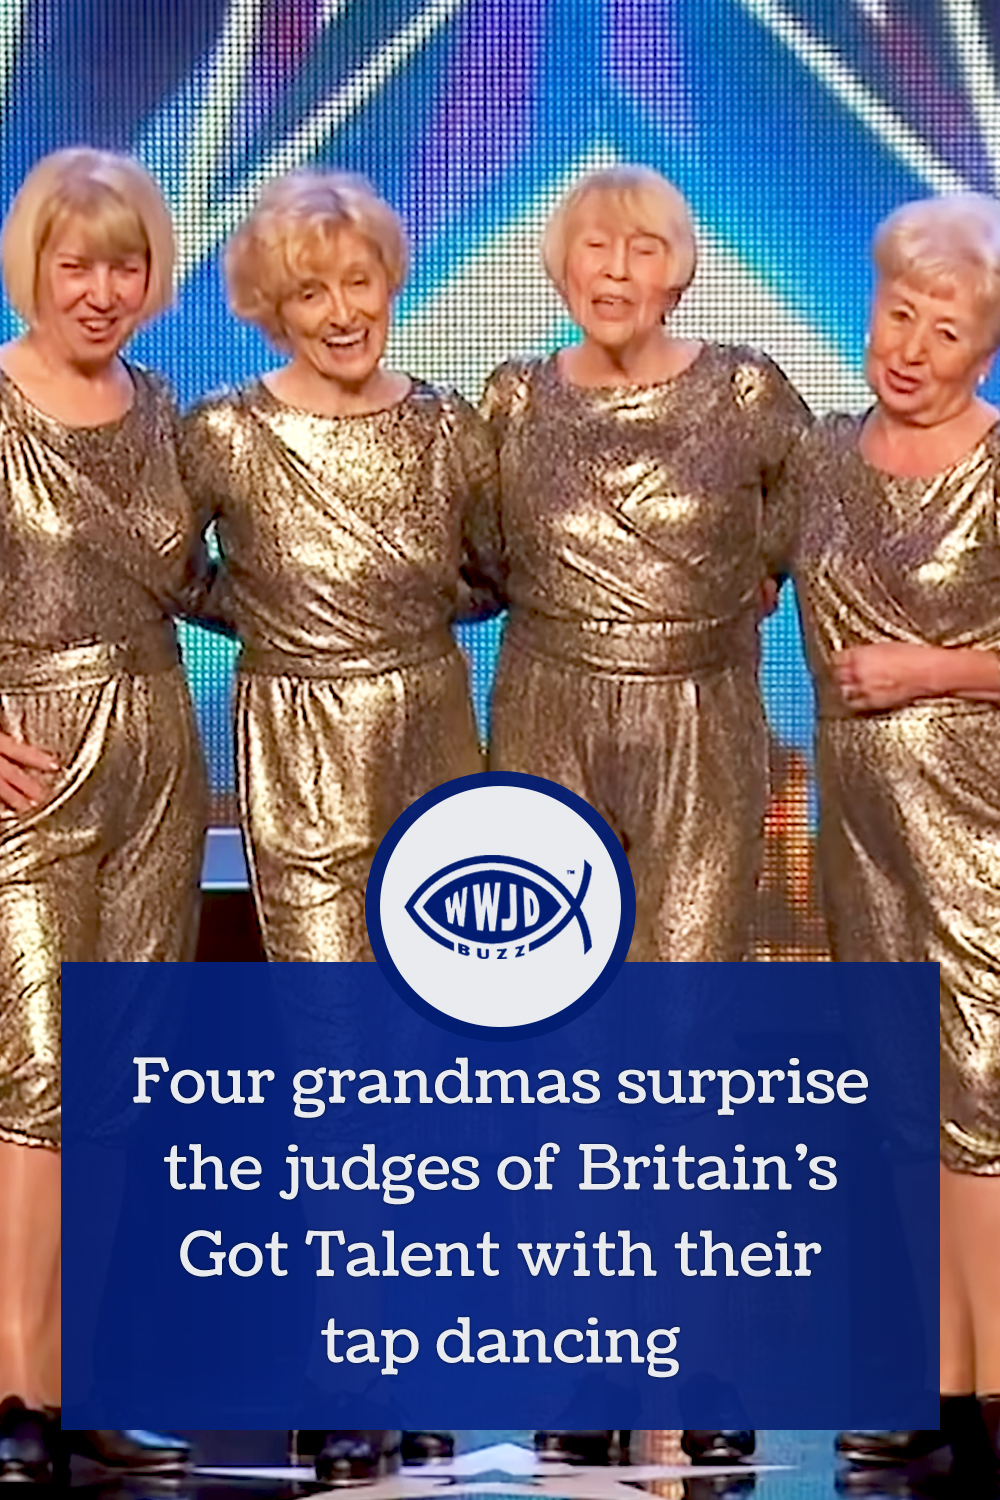 Four grandmas surprise the judges of Britain’s Got Talent with their tap dancing